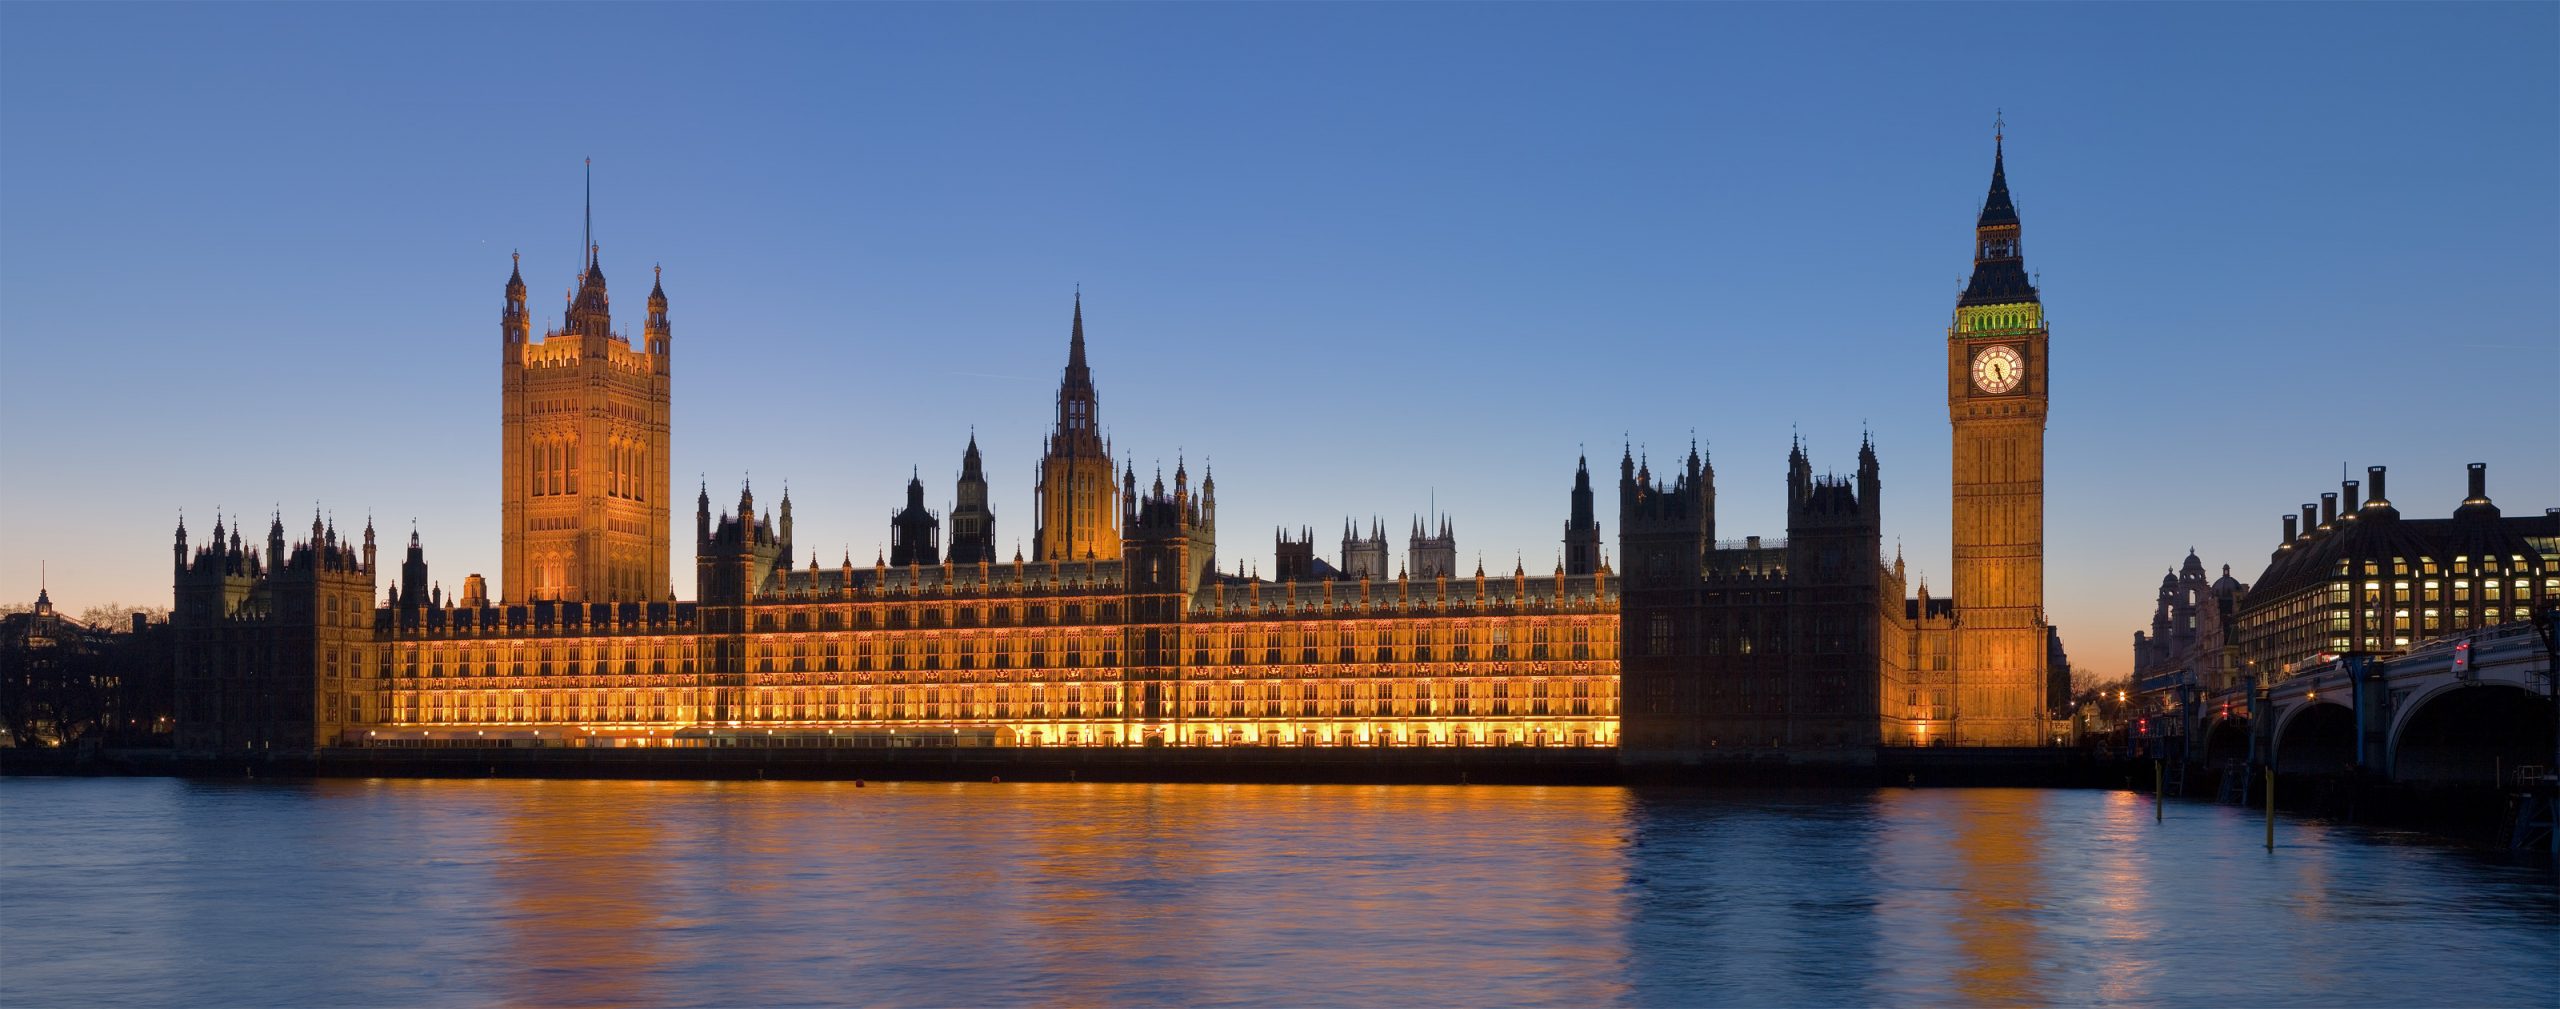 A photo of the Palace of Westminster taken from across the river during the evening. There's a real beautiful contrast between the fiery oranges lighting up the walls of the palace and the peaceful blue sky above.